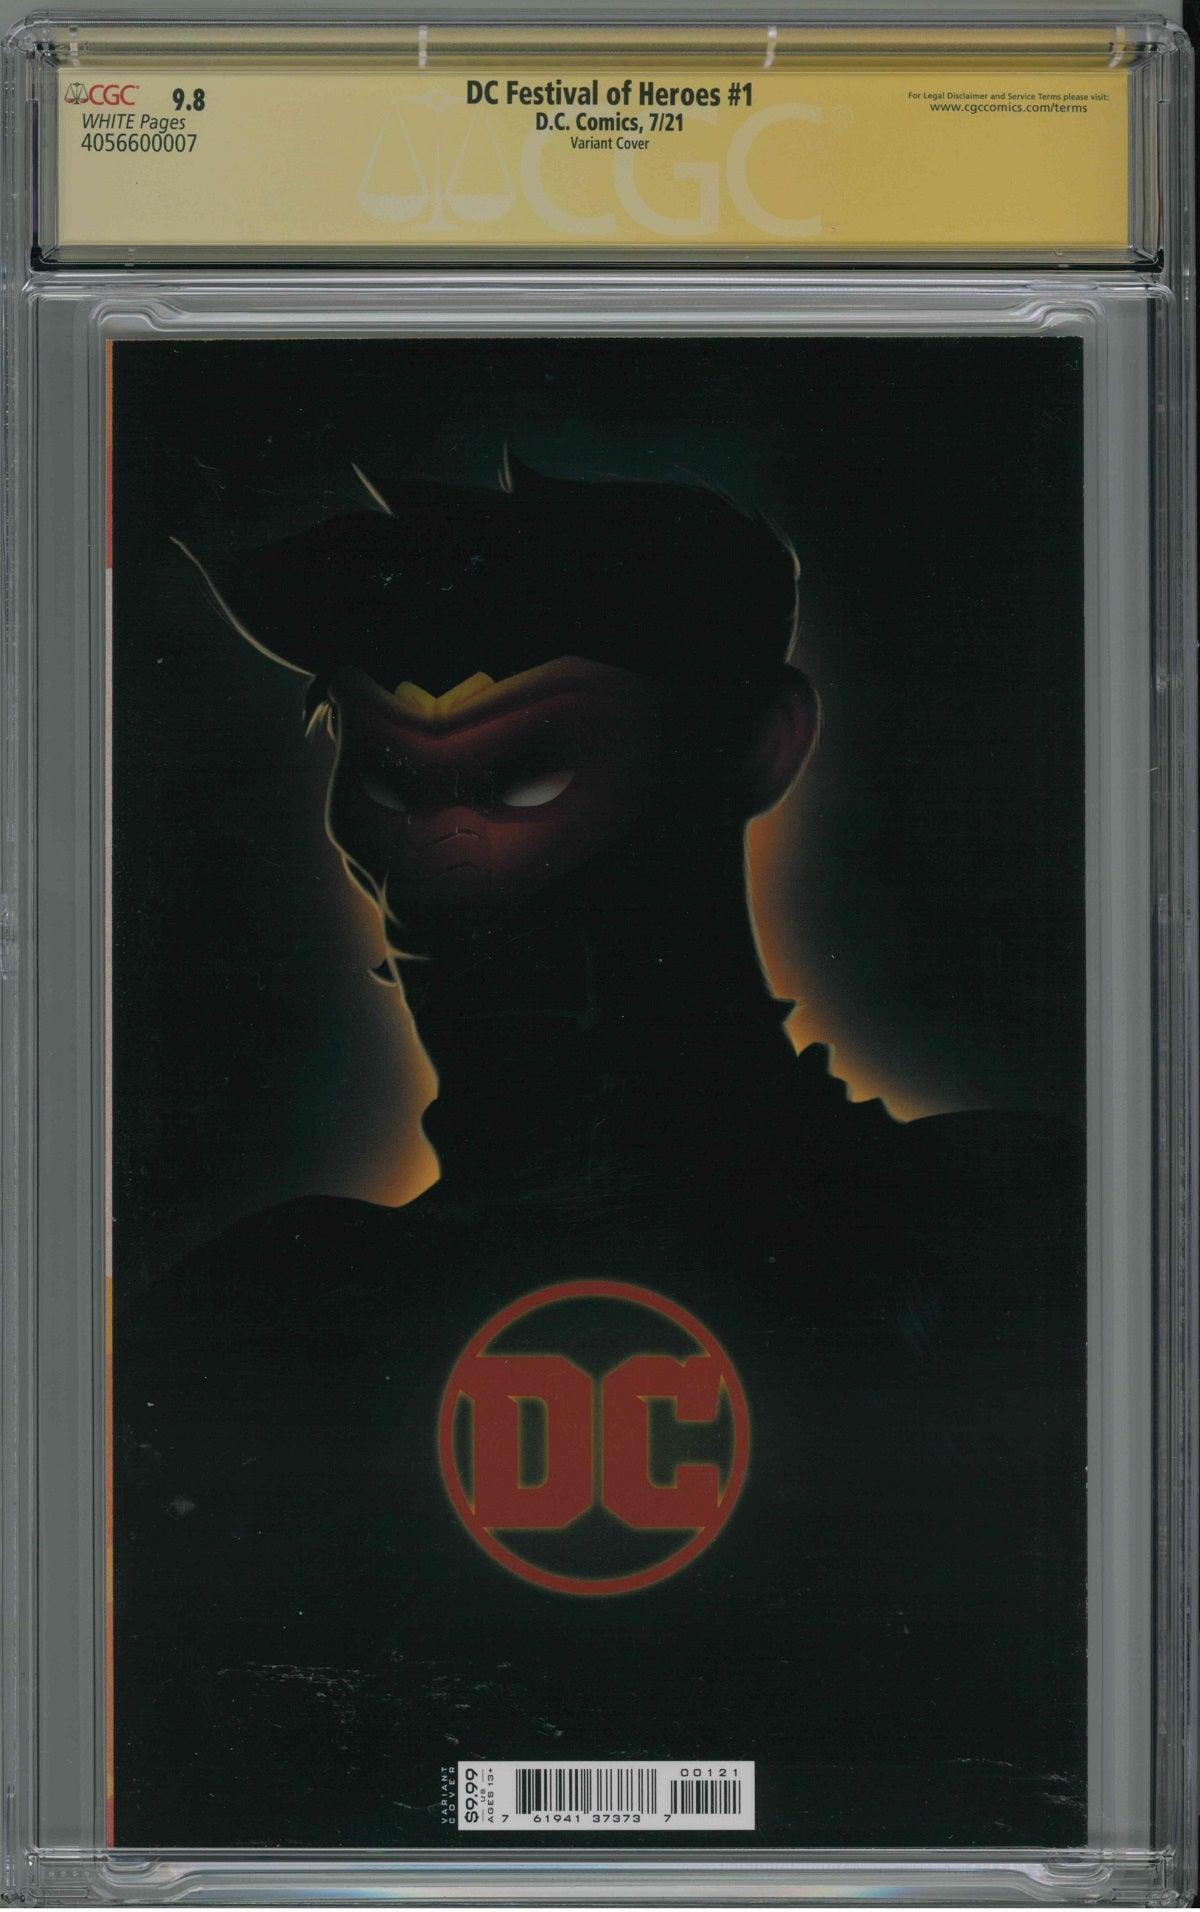 CGC DC FESTIVAL OF HEROES #1 LAU VARIANT (9.8) SIGNATURE SERIES - SIGNED BY STANLEY "ARTGERM" LAU - Kings Comics